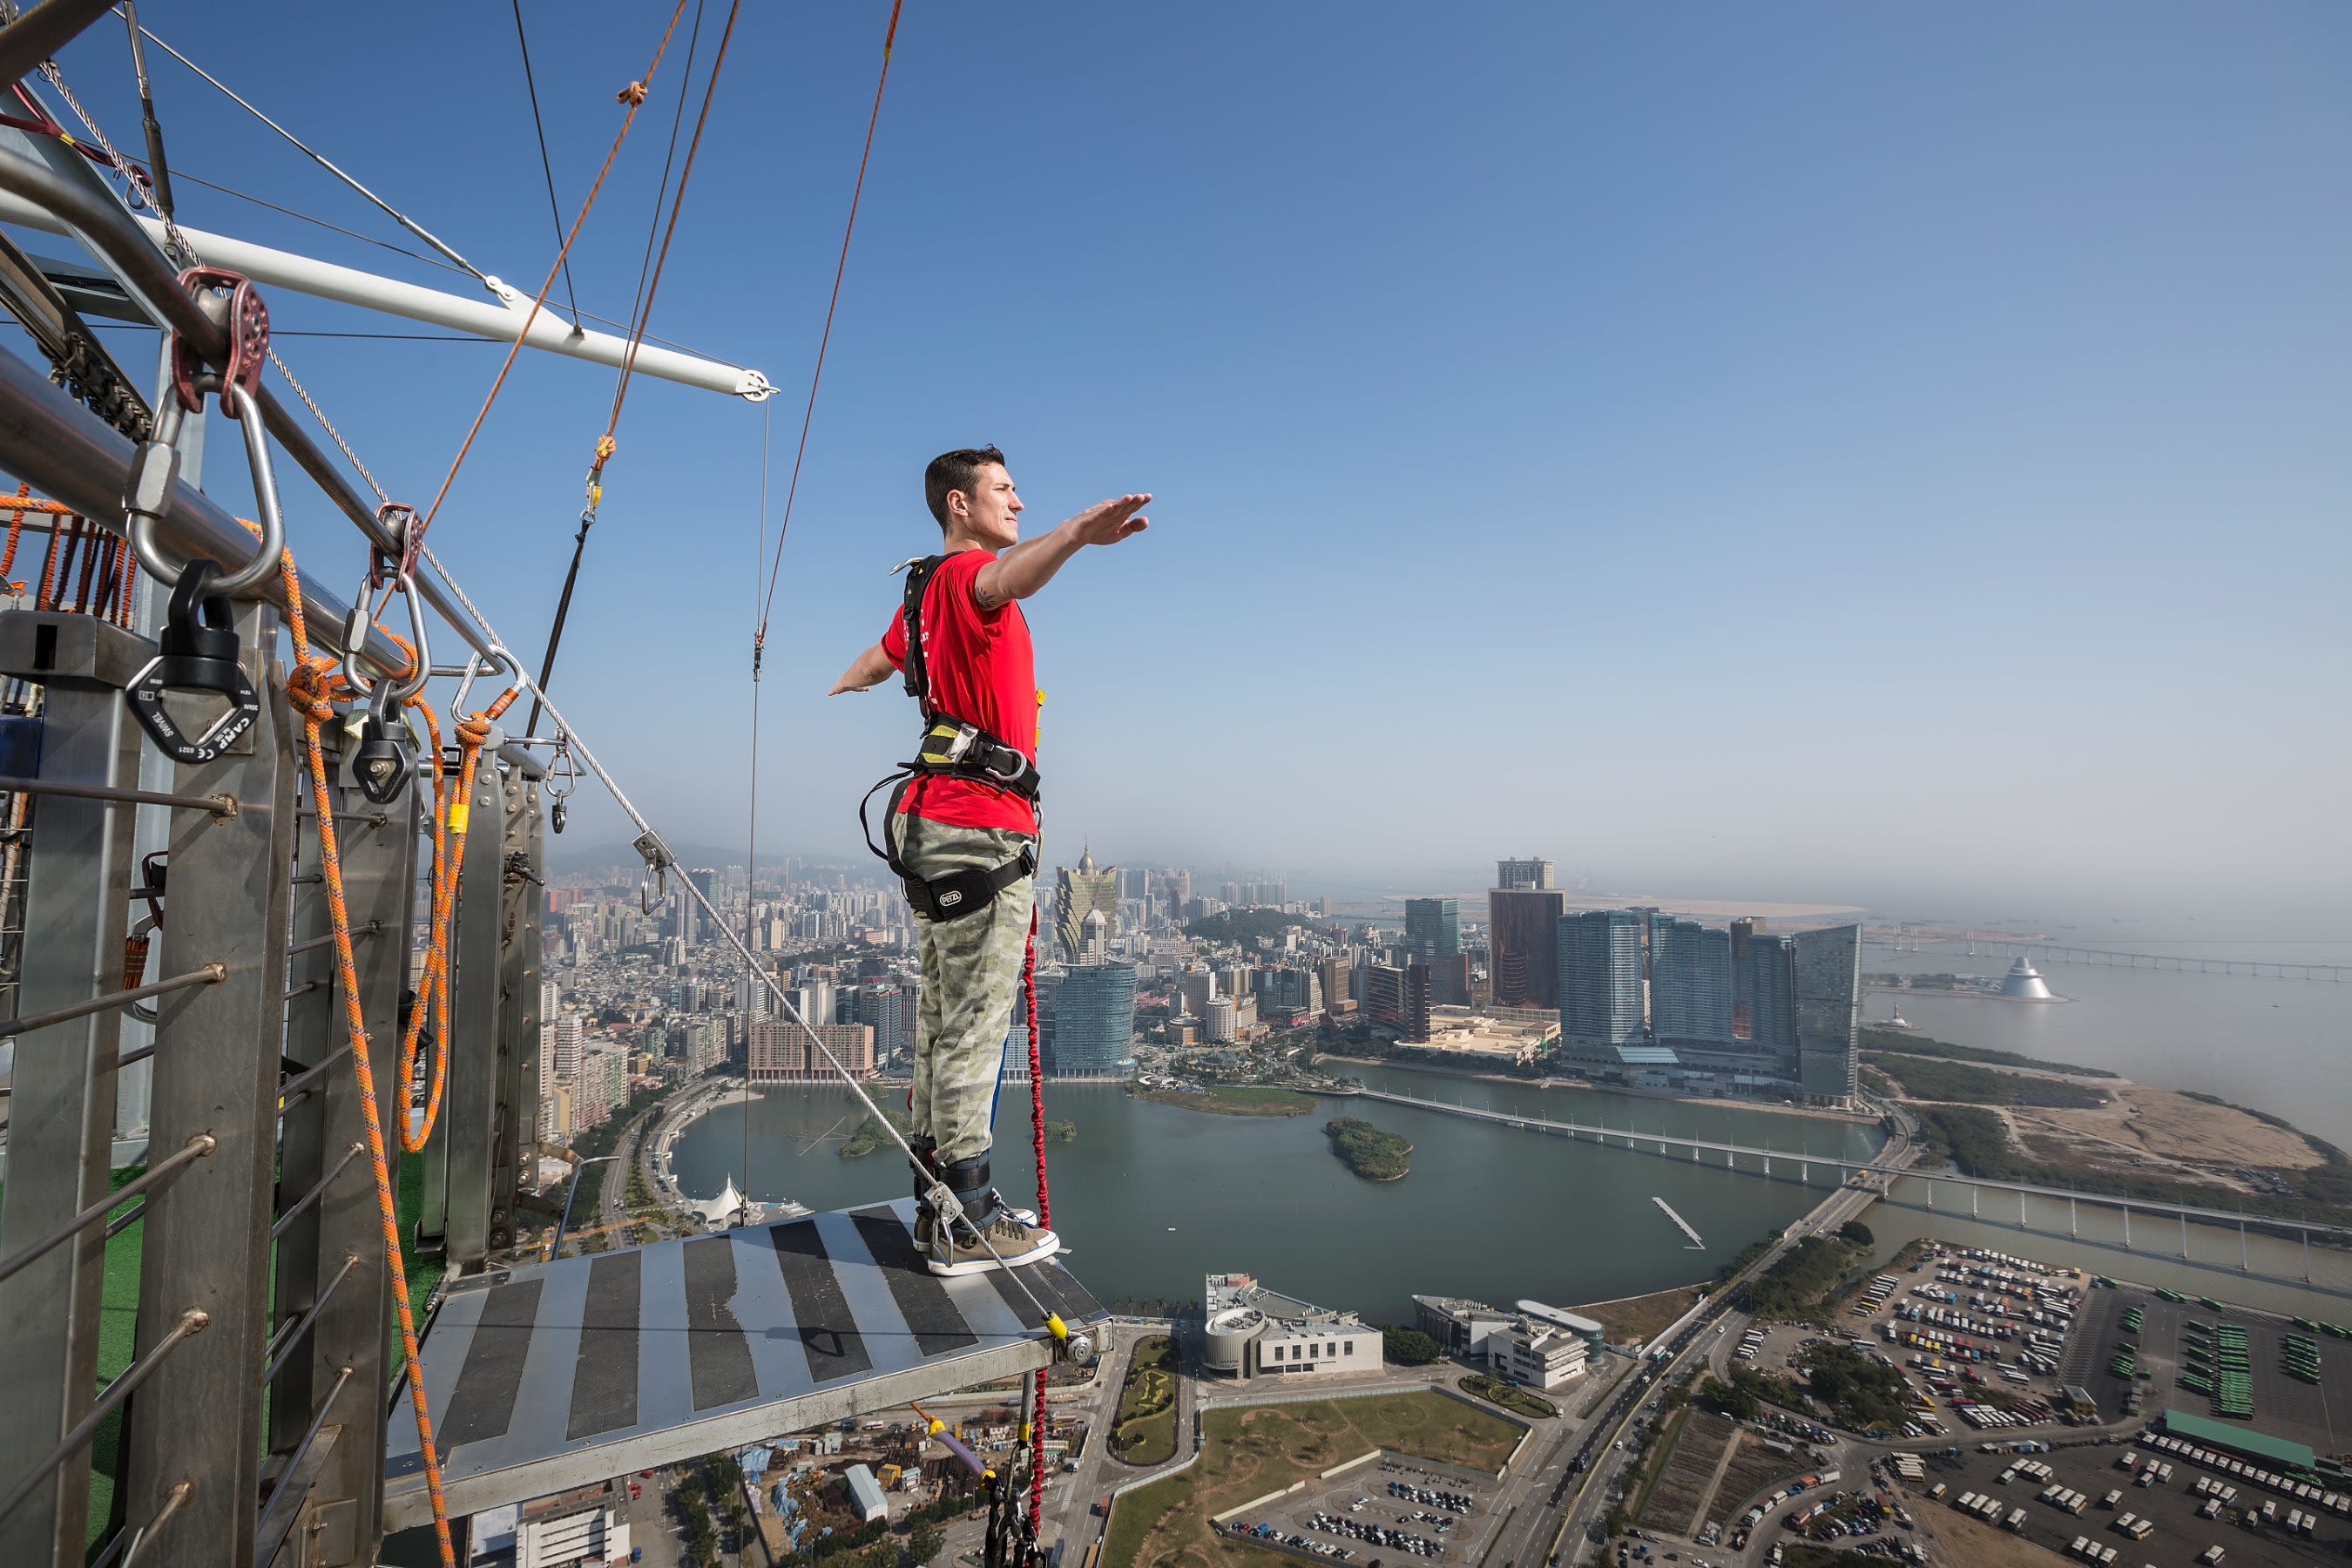 15 of the world's best bungee jumps